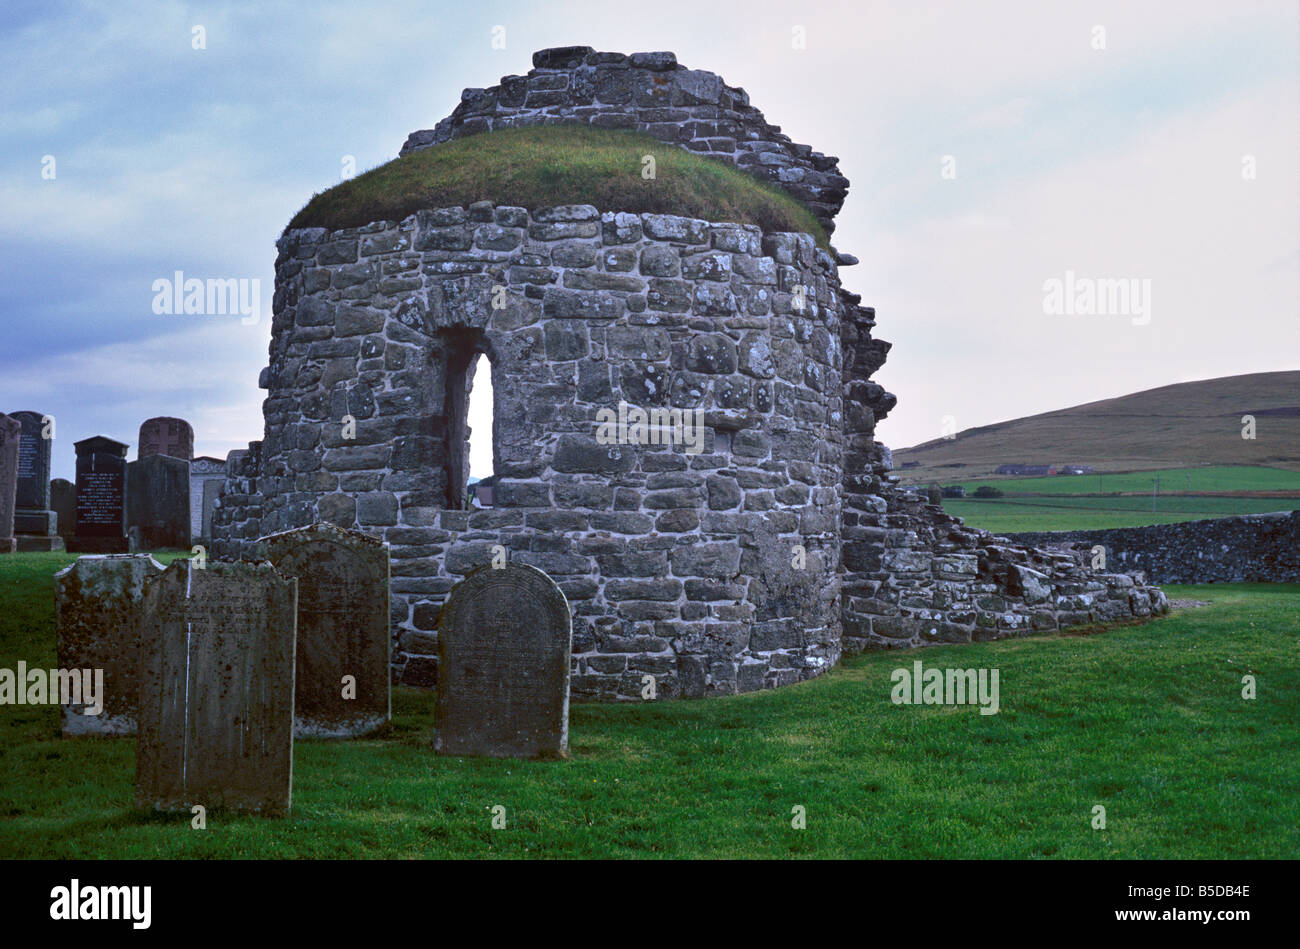 Orphir round church dating form the Norse period, Mainland, Orkney Islands, Scotland, Europe Stock Photo